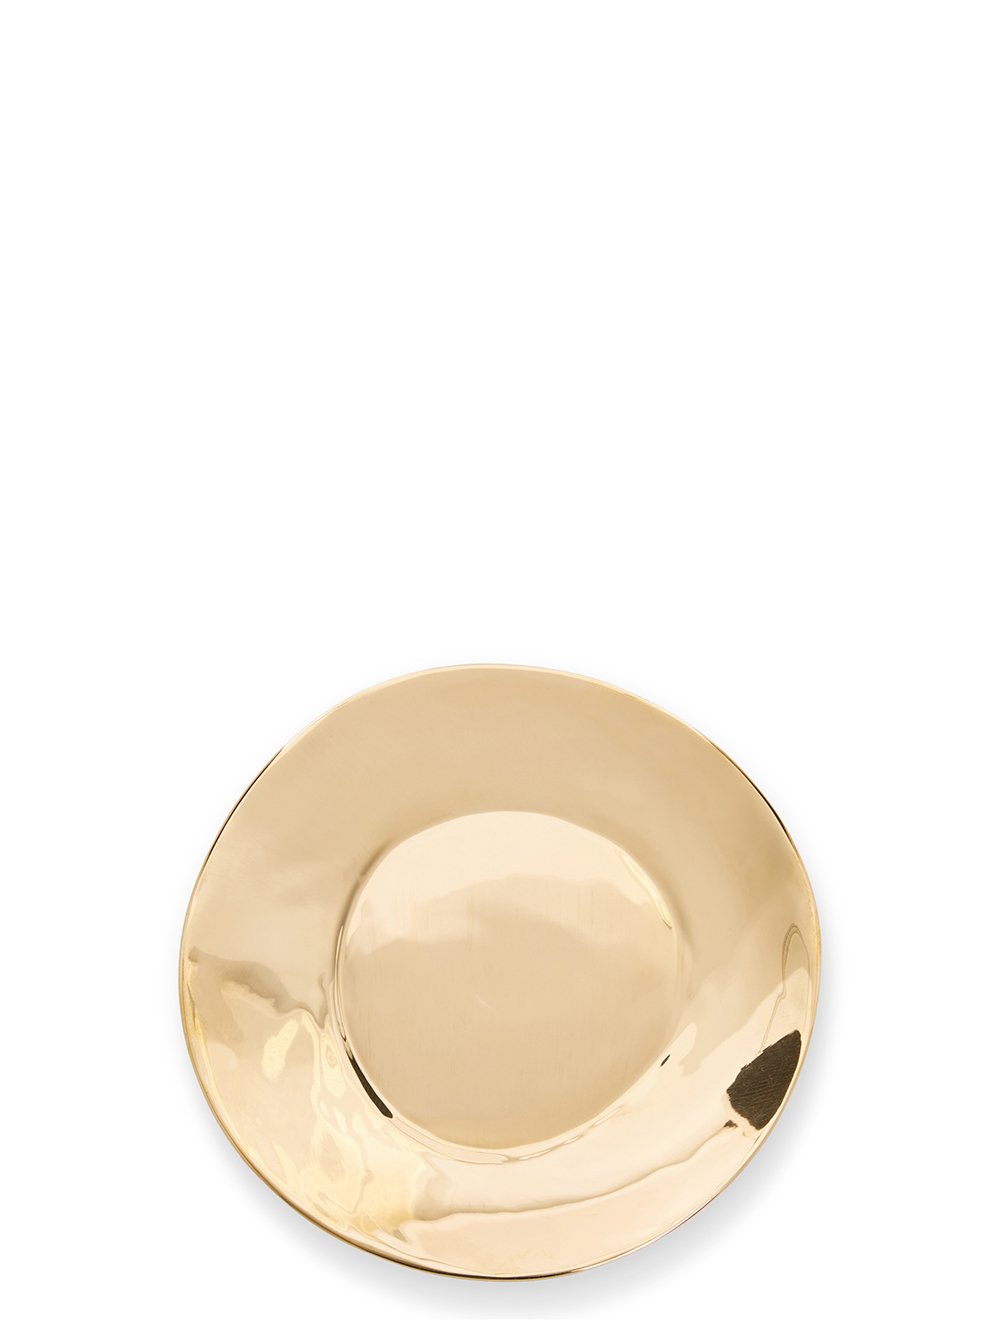 RICK OWENS SMALL PLATE IN GOLD TONE BRONZE.